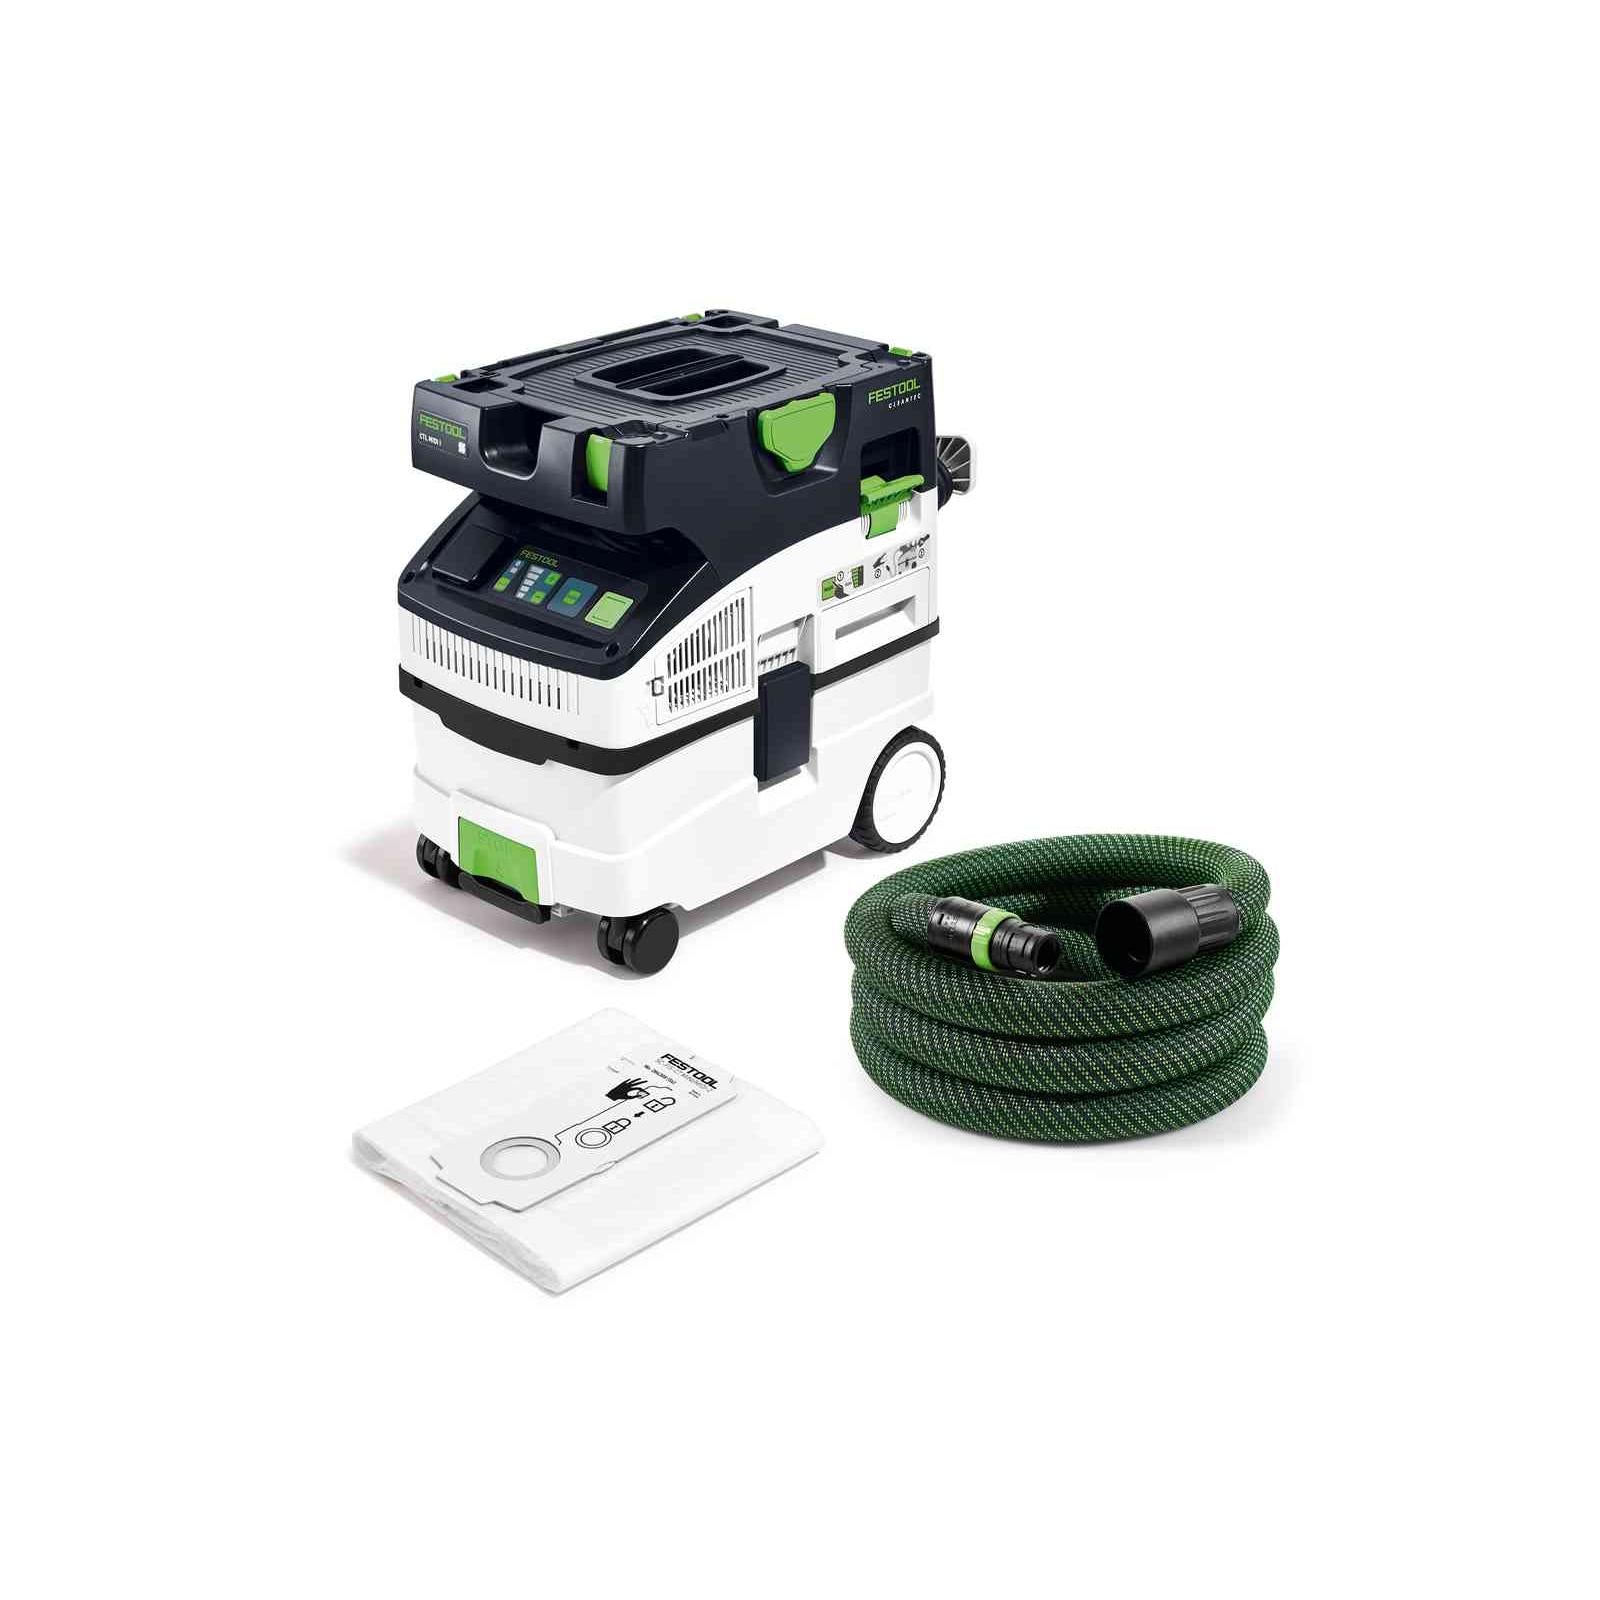 Festool Mobile dust extractor CLEANTEC CTL MIDI I 574832 Power Tool Services